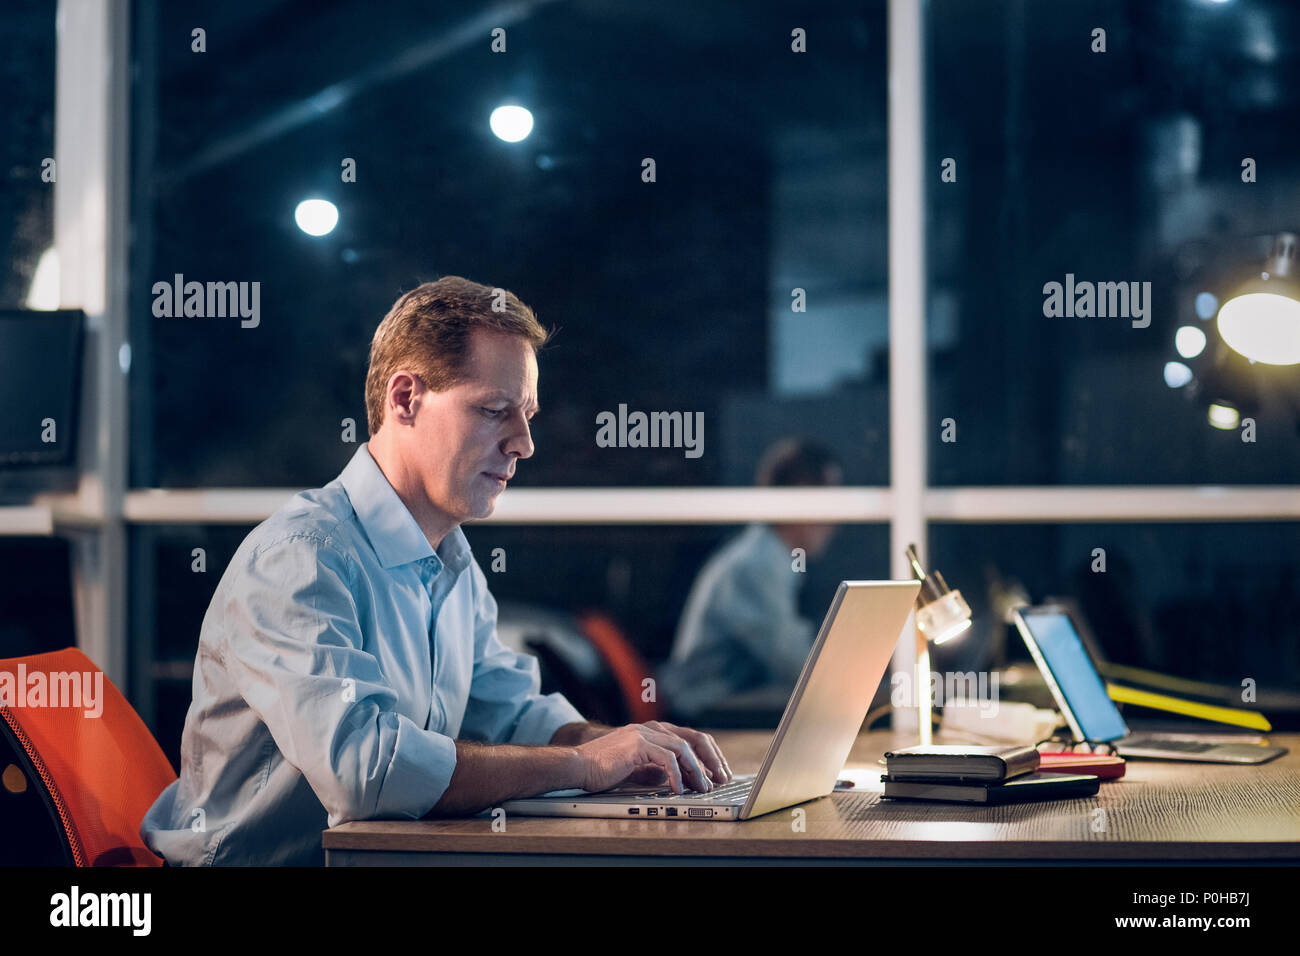 Businessman working with computer late at night. Stock Photo